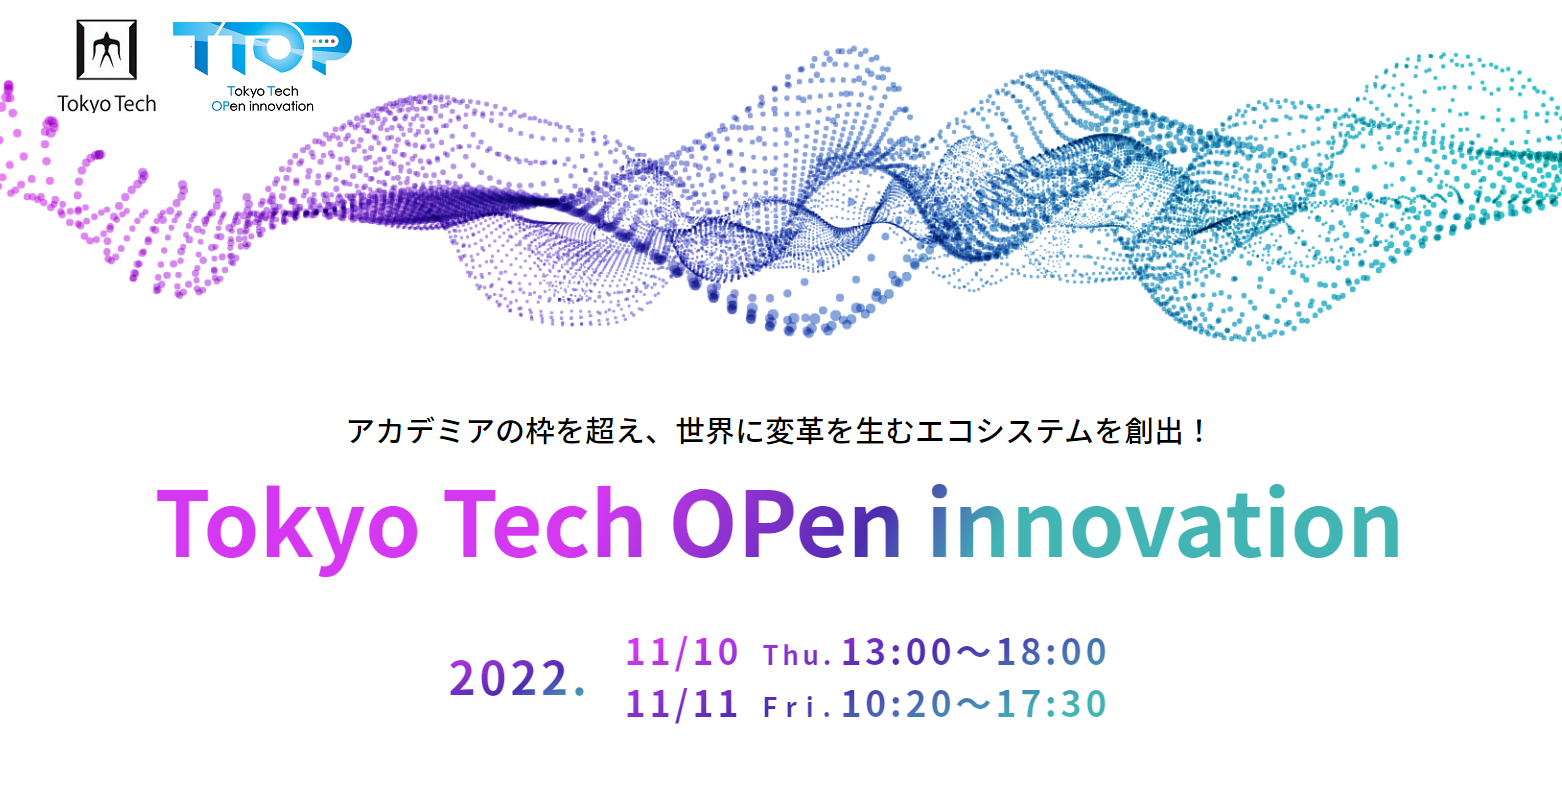 Registration for “Tokyo Tech OPen innovation (TTOP) 2022”, the biggest industry-university collaboration events at Tokyo Tech, is now open! (Nov. 10-11, 2022)